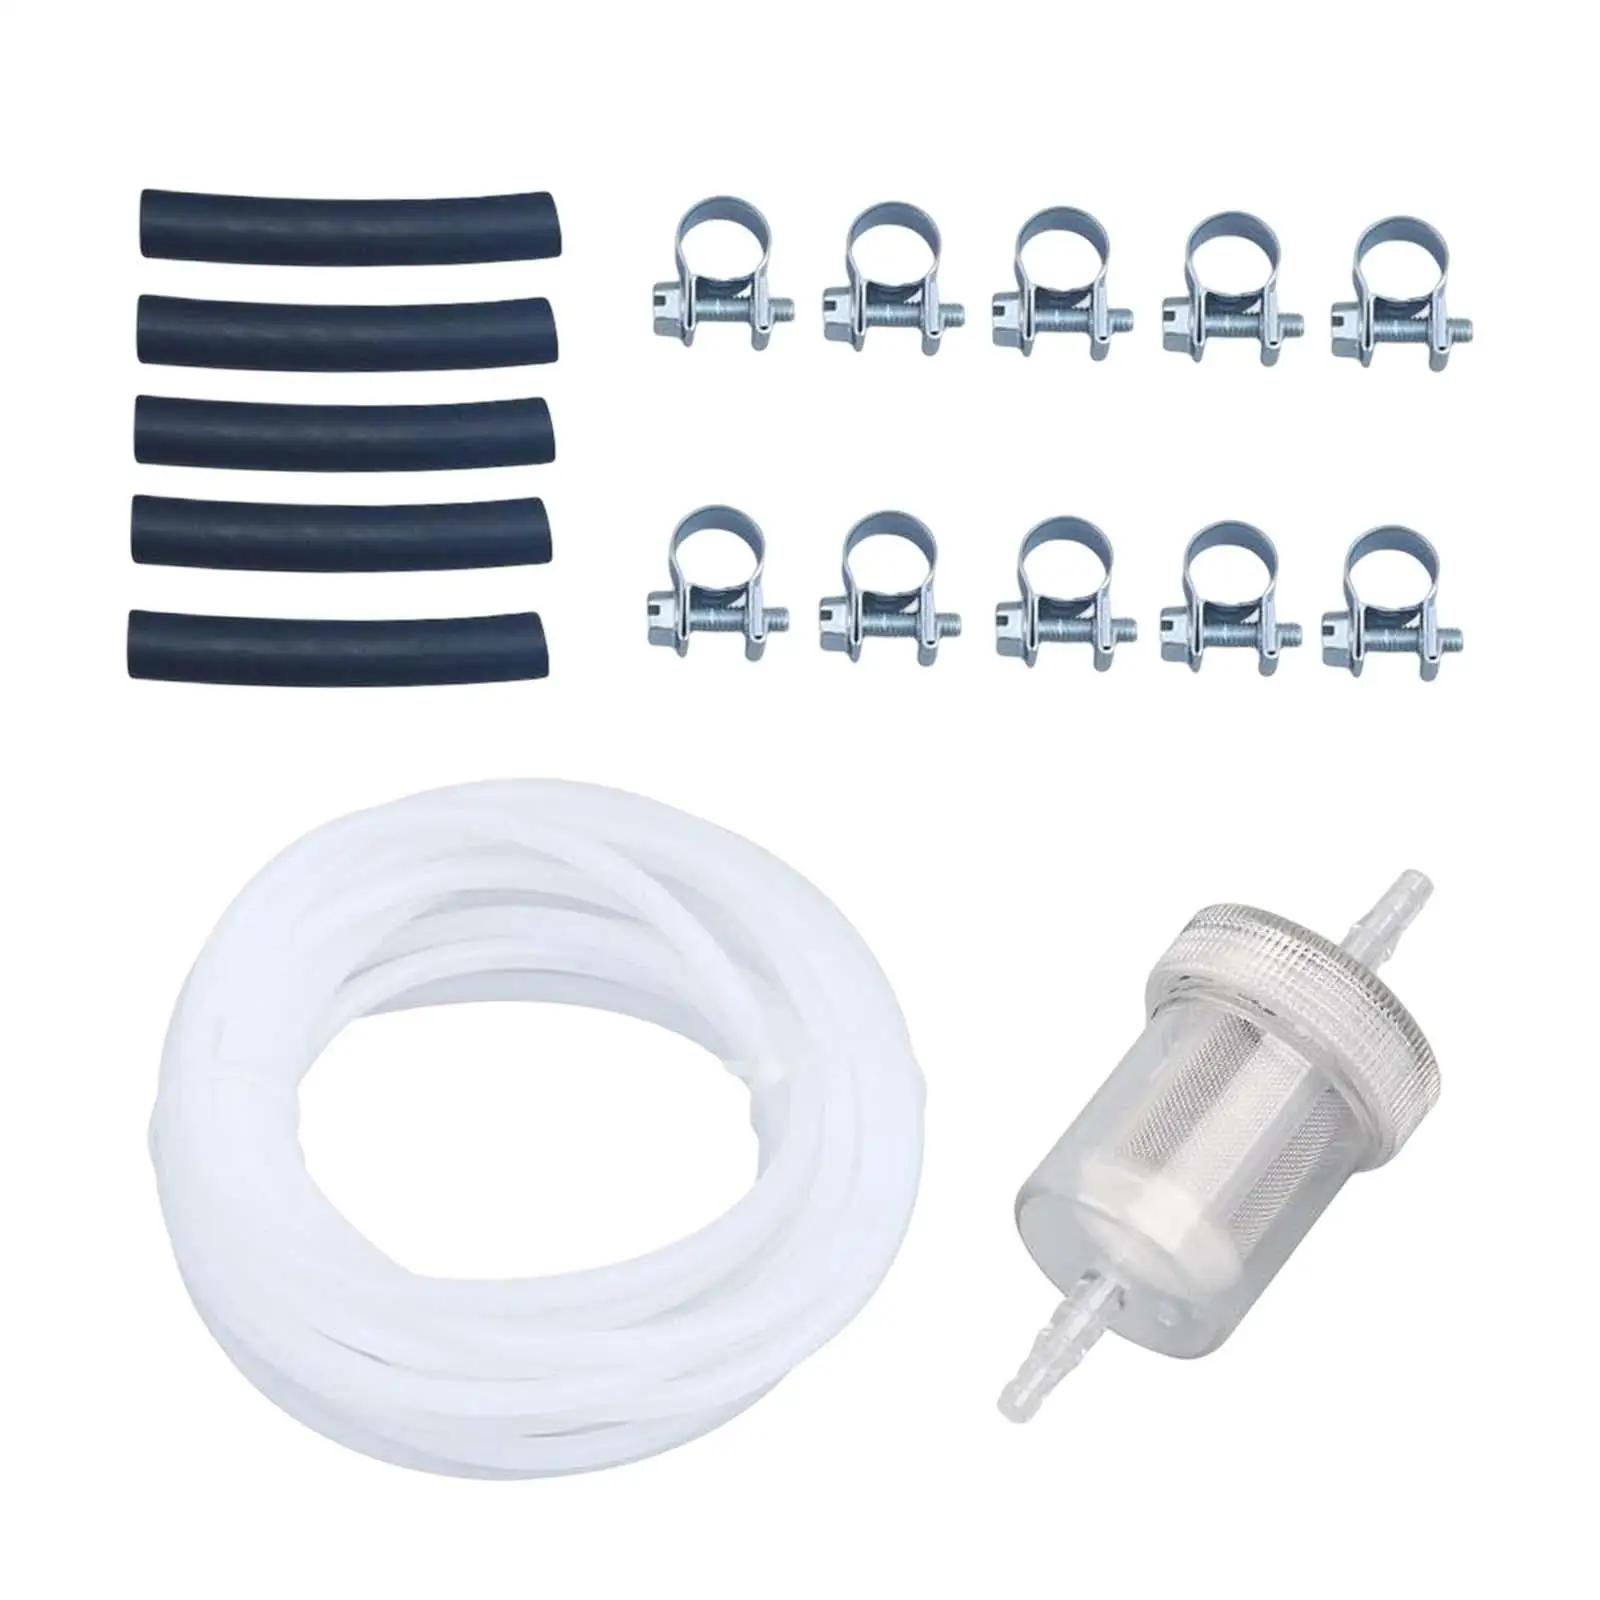 Inline Fuel Hose Clip Pipe Line Set Replaces for Eberspacher Heater Tank Easily Install Premium Material Accessories